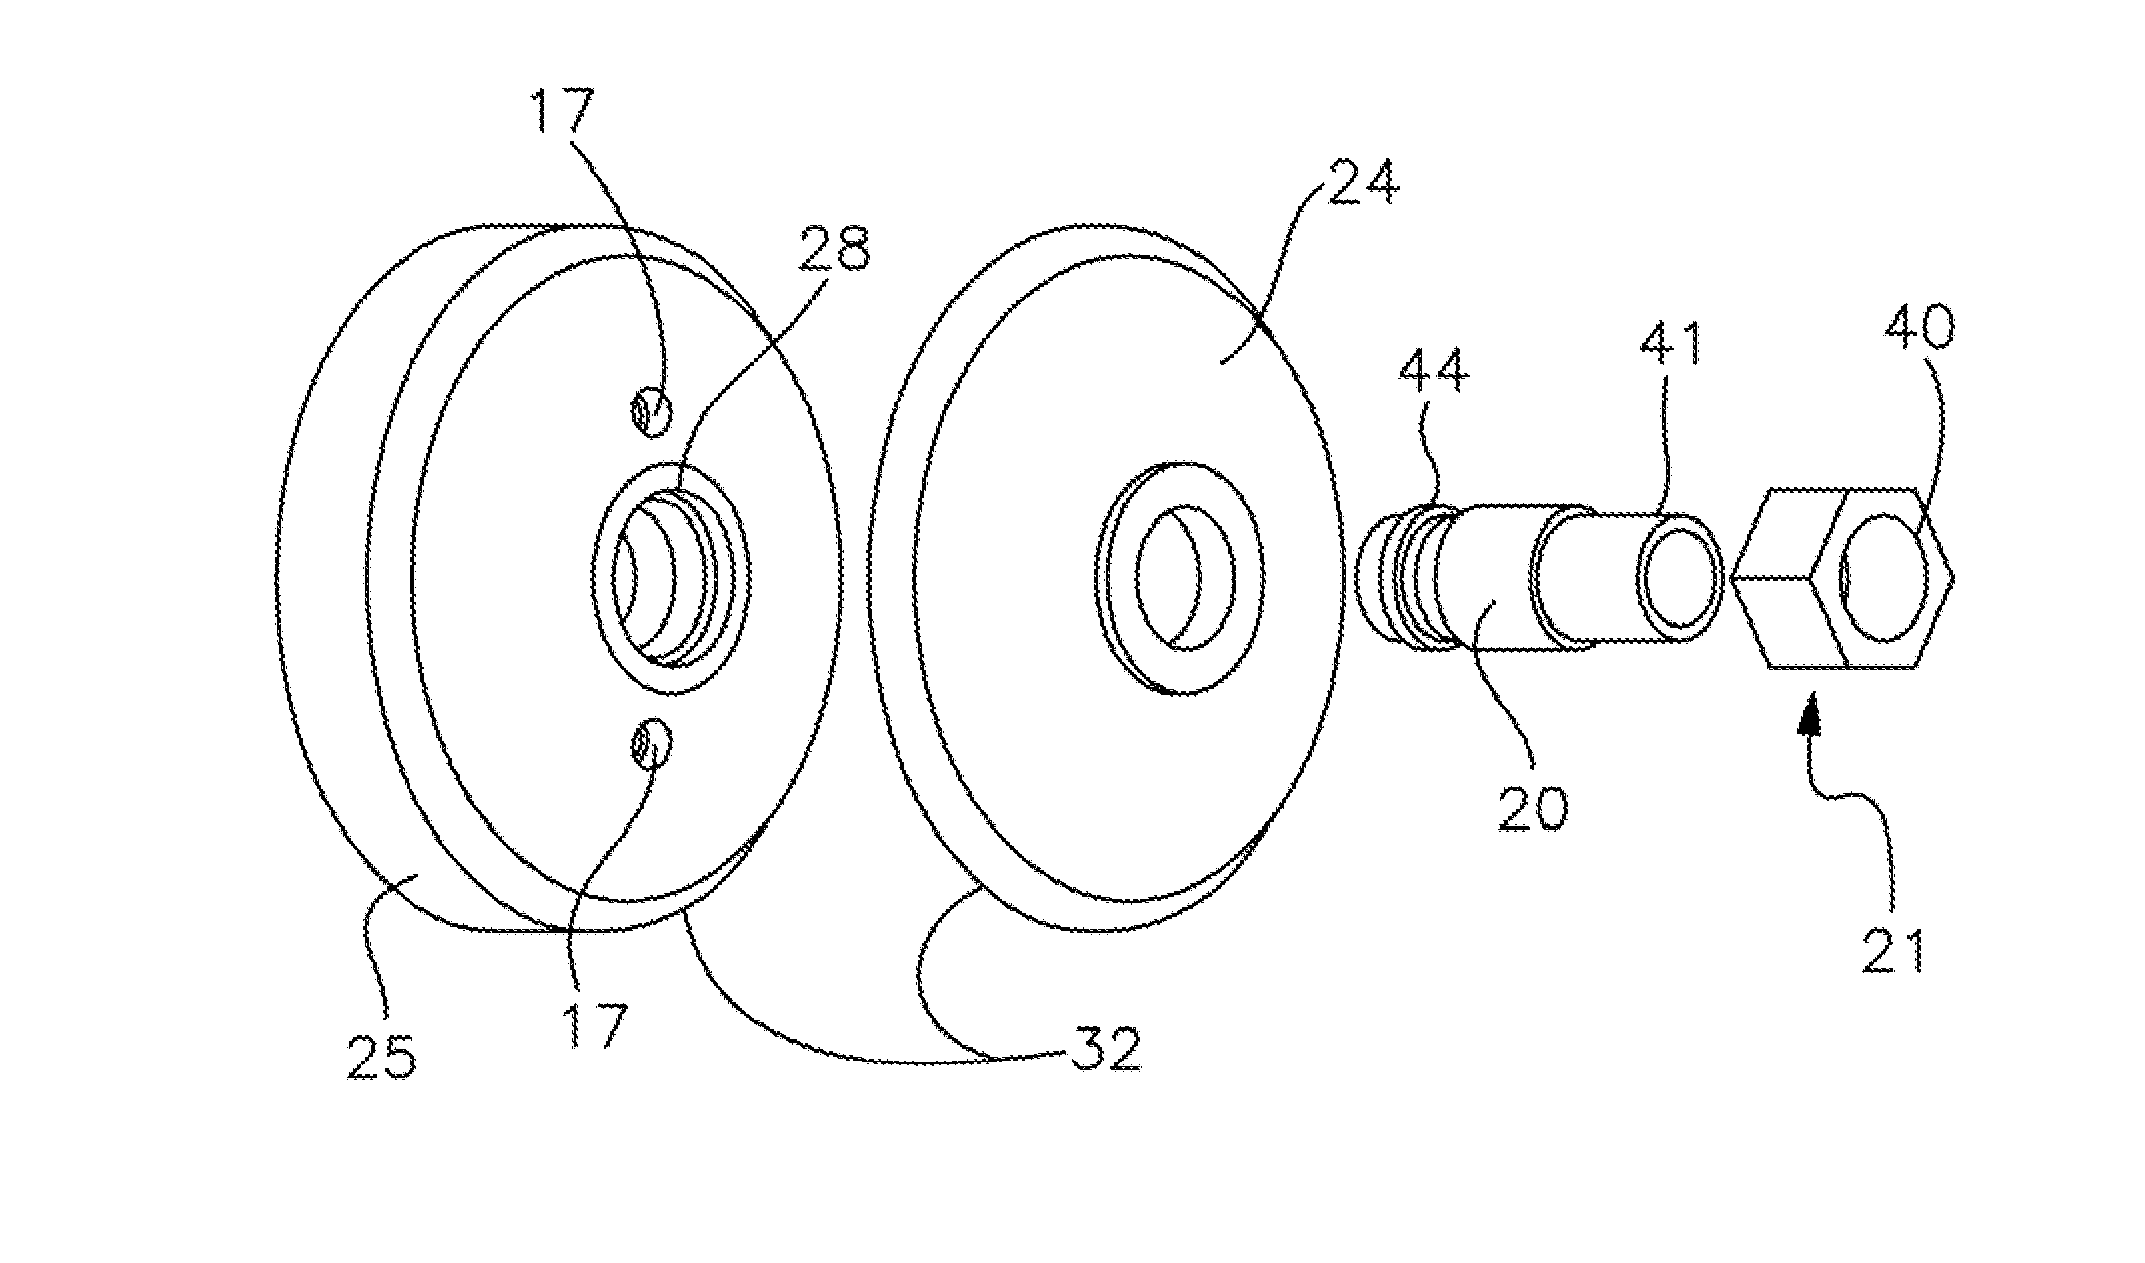 Apparatus for fastening single and multiple sheets and method for using same